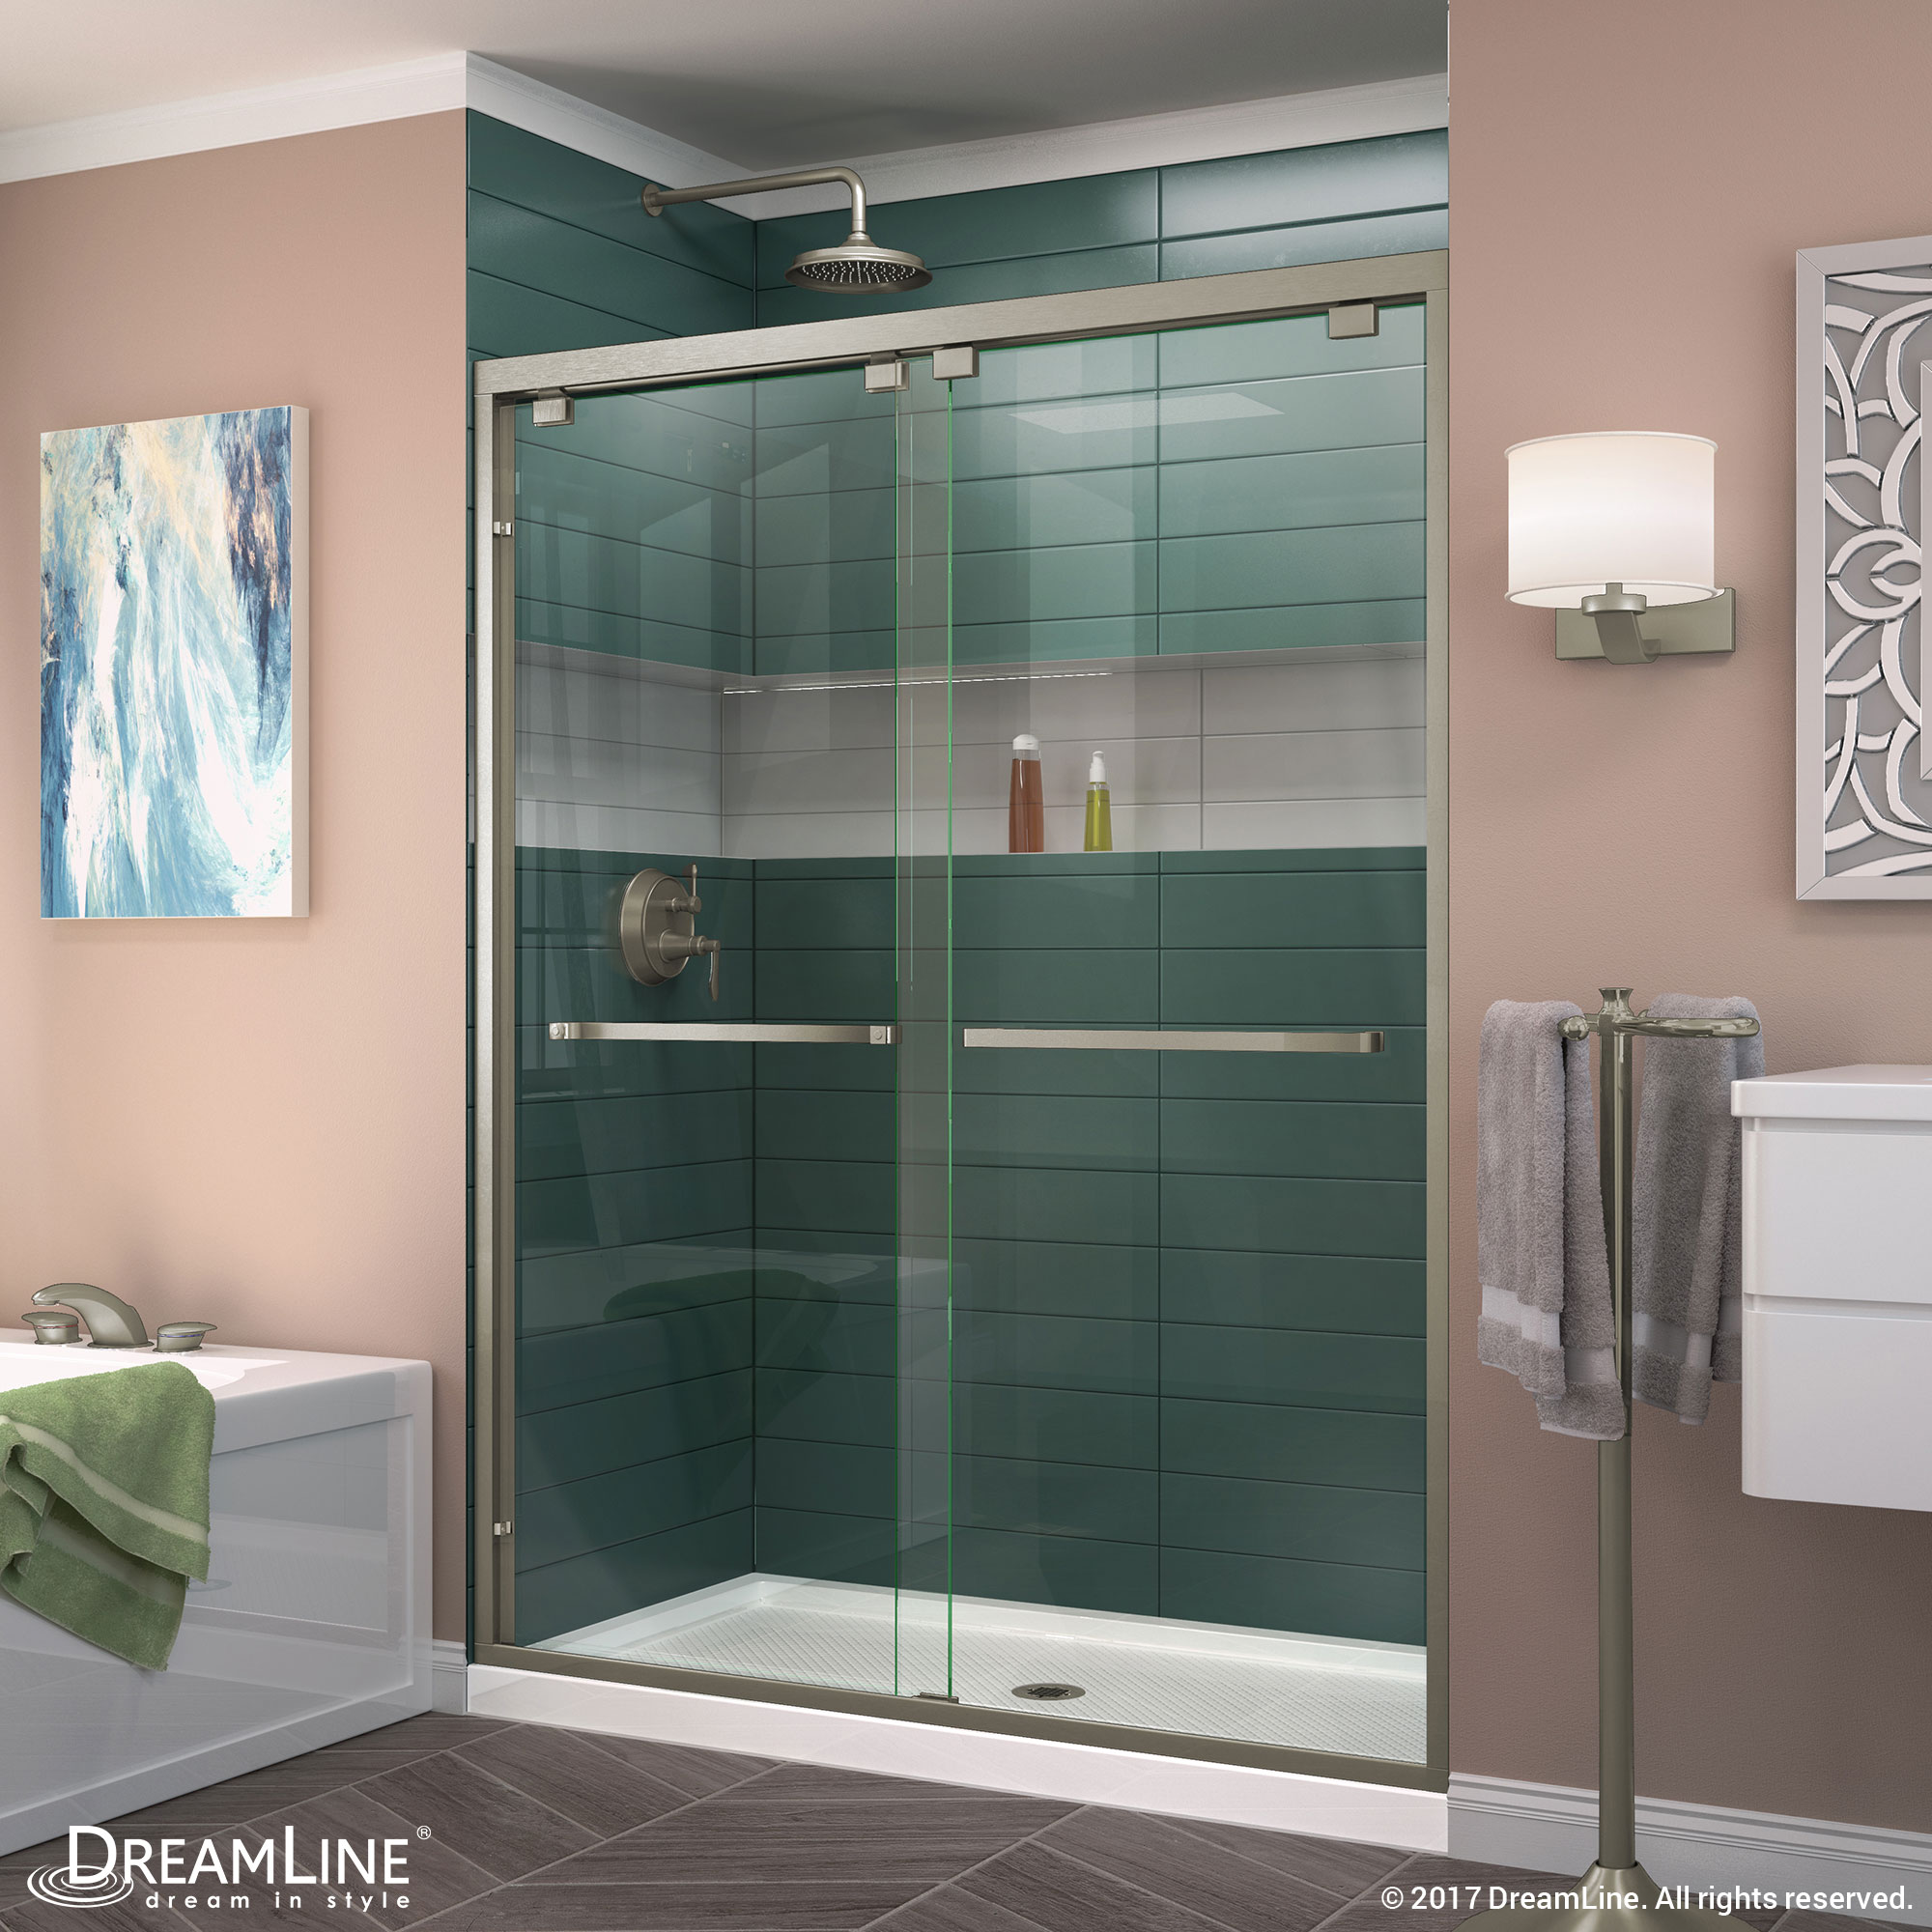 DreamLine Encore 36 in. D x 60 in. W x 78 3/4 in. H Bypass Shower Door in Chrome and Center Drain White Base Kit